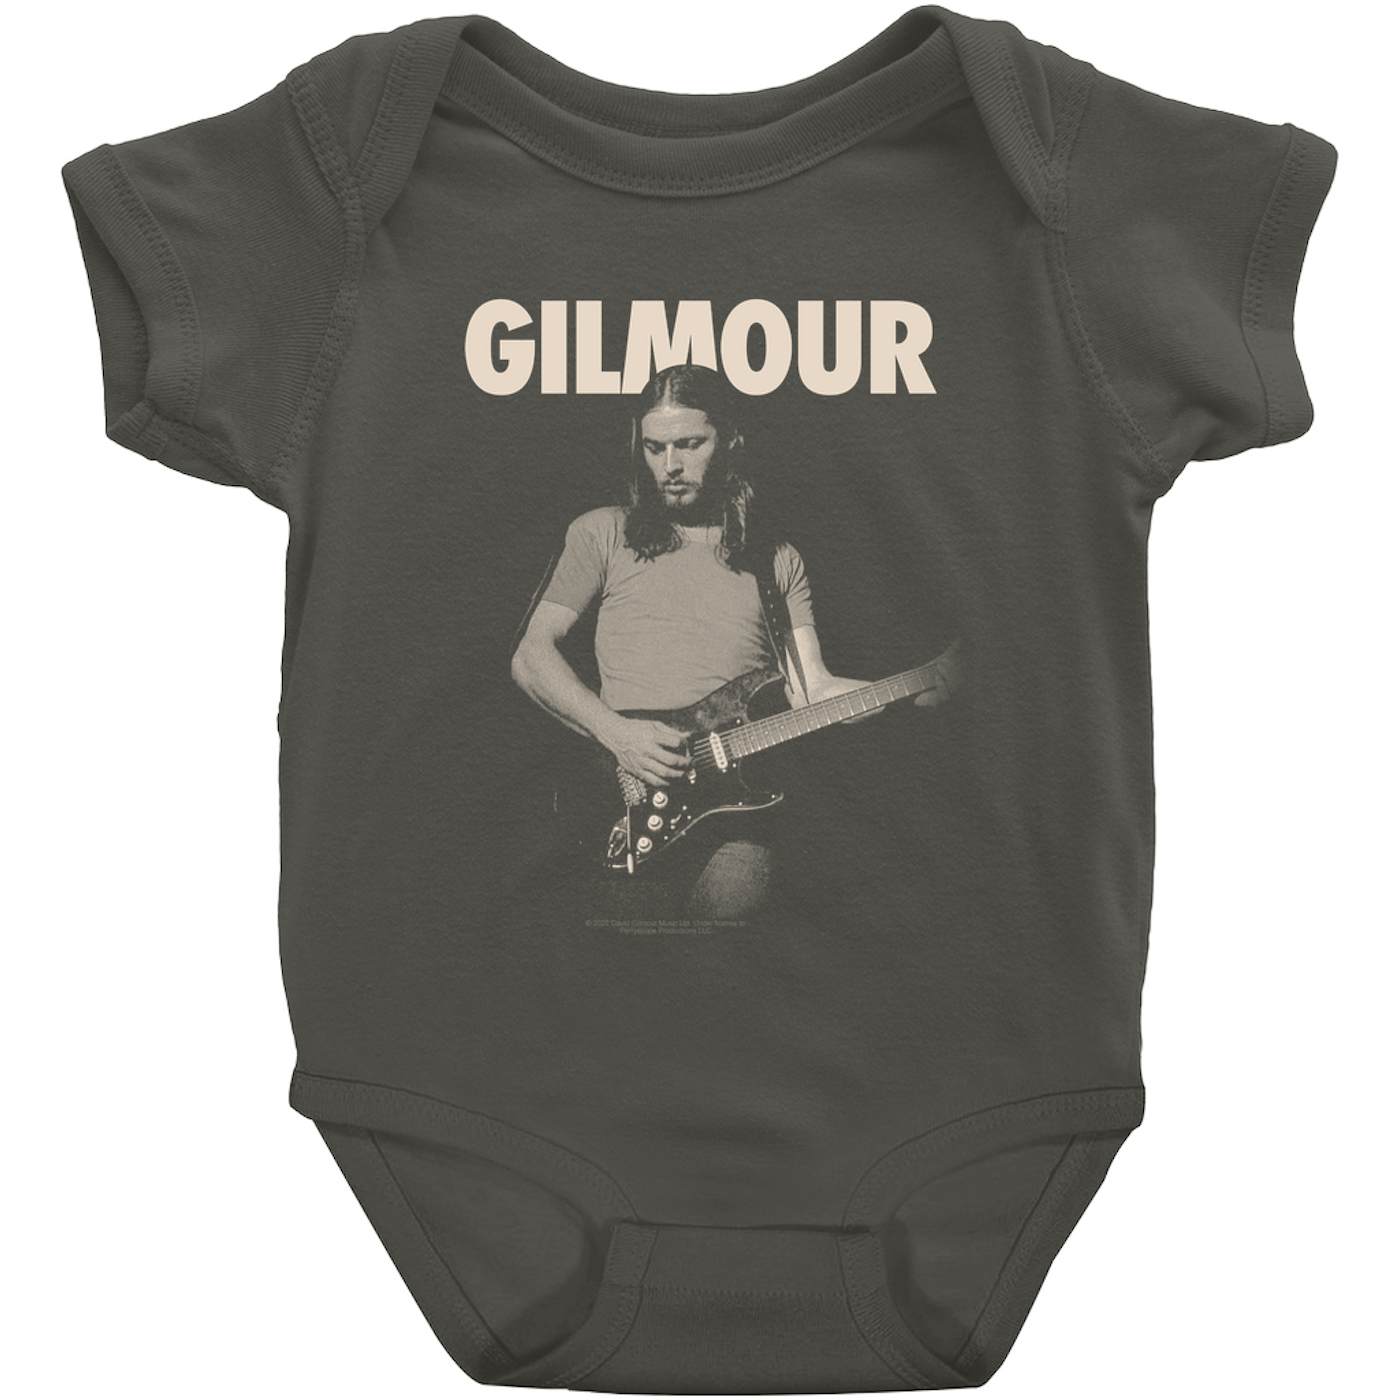 David Gilmour Baby Short Sleeve Bodysuit | Young David Gilmour and Bold Logo David Gilmour Bodysuit